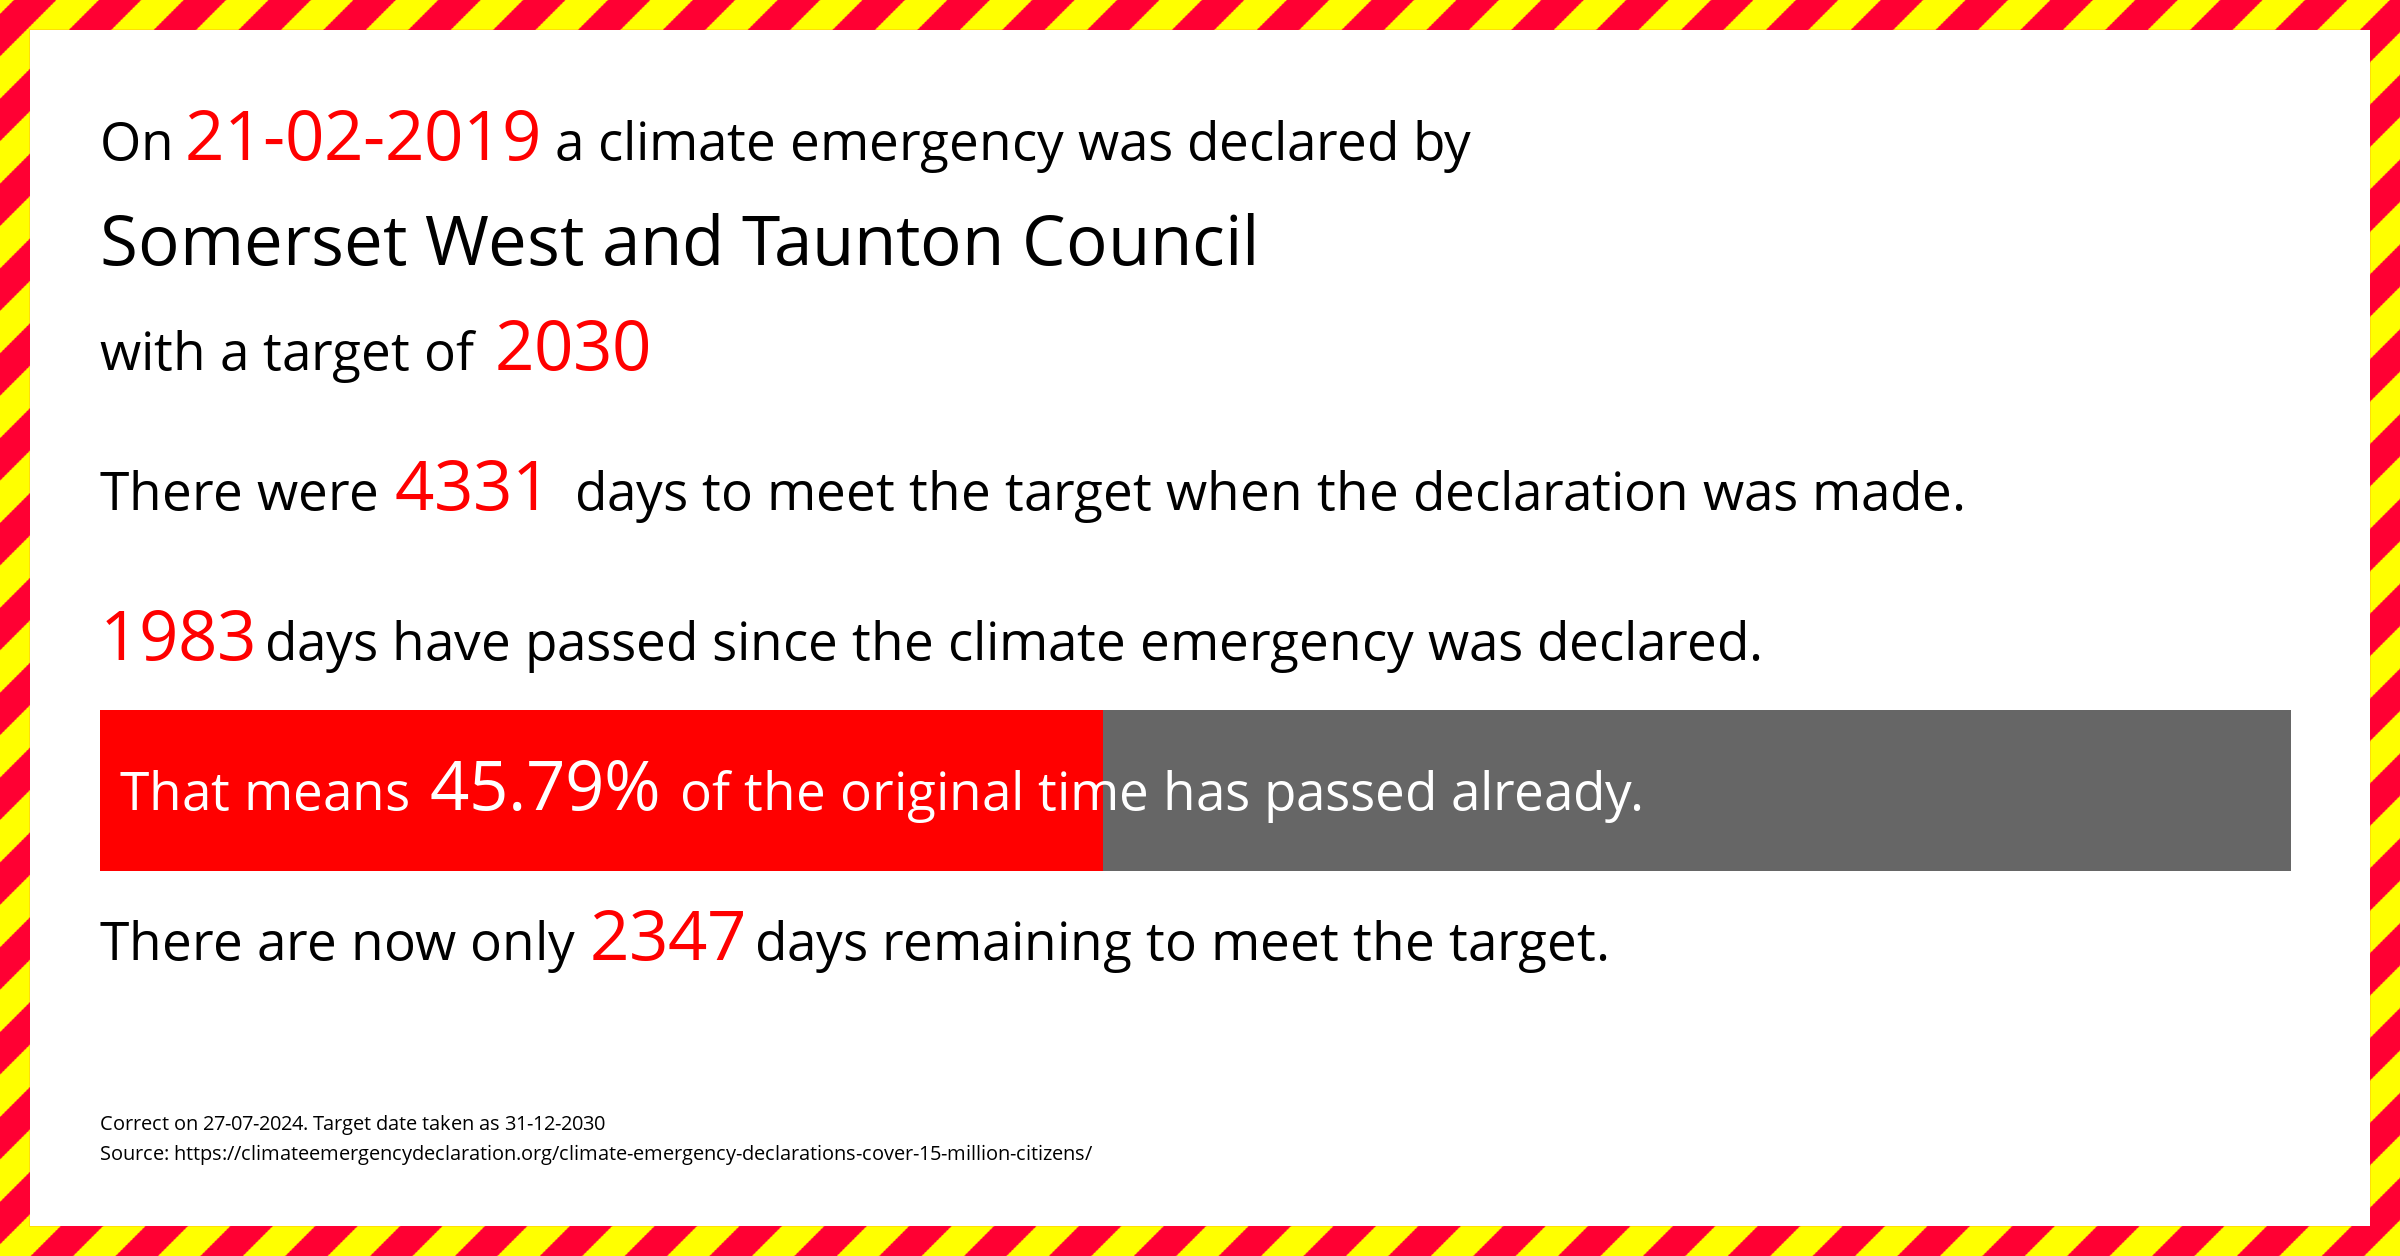 Somerset West and Taunton Council declared a Climate emergency on Thursday 21st February 2019, with a target of 2030.